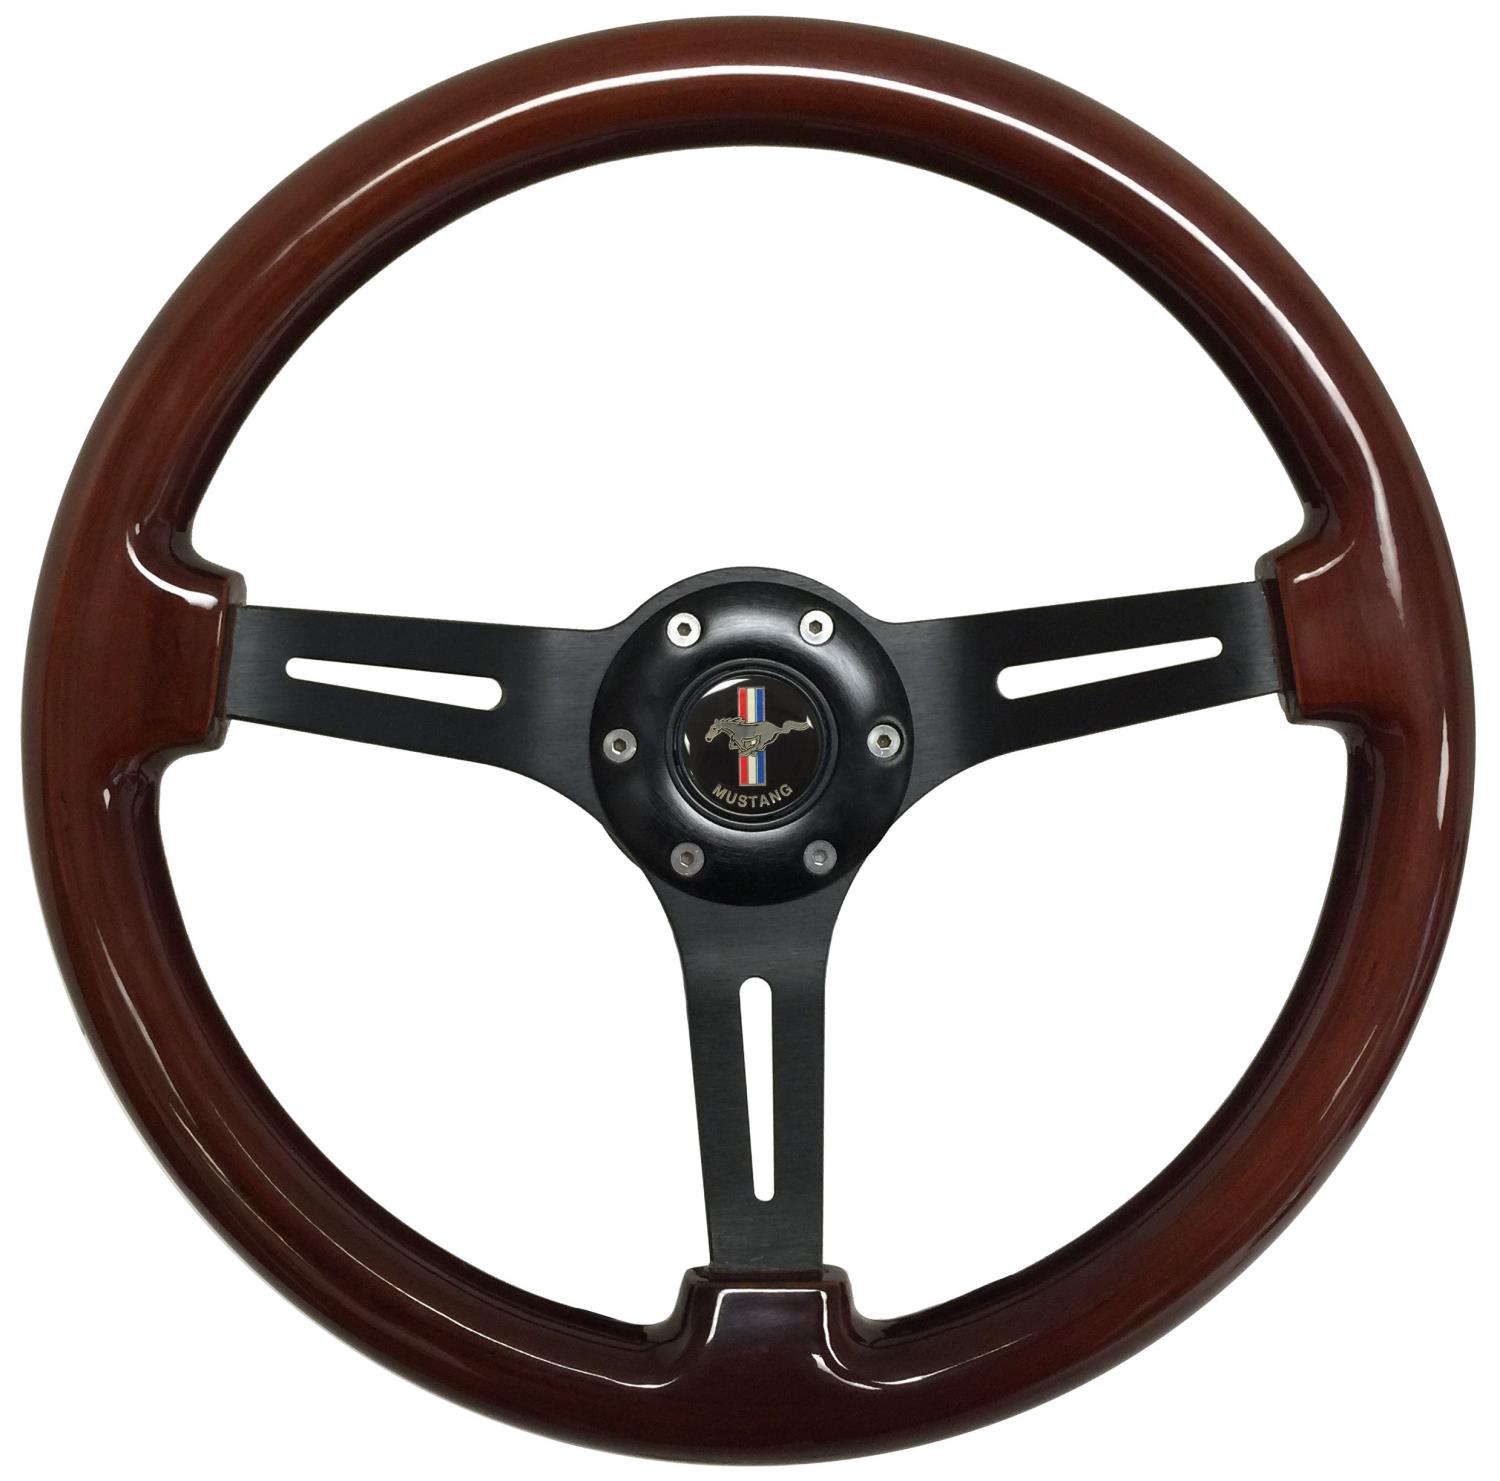 S6 Sport Steering Wheel Kit for 1979-1982 Ford Mustang, 14 in. Diameter, Mahogany Wood Grip, with 6-Bolt Adapter and Horn Button